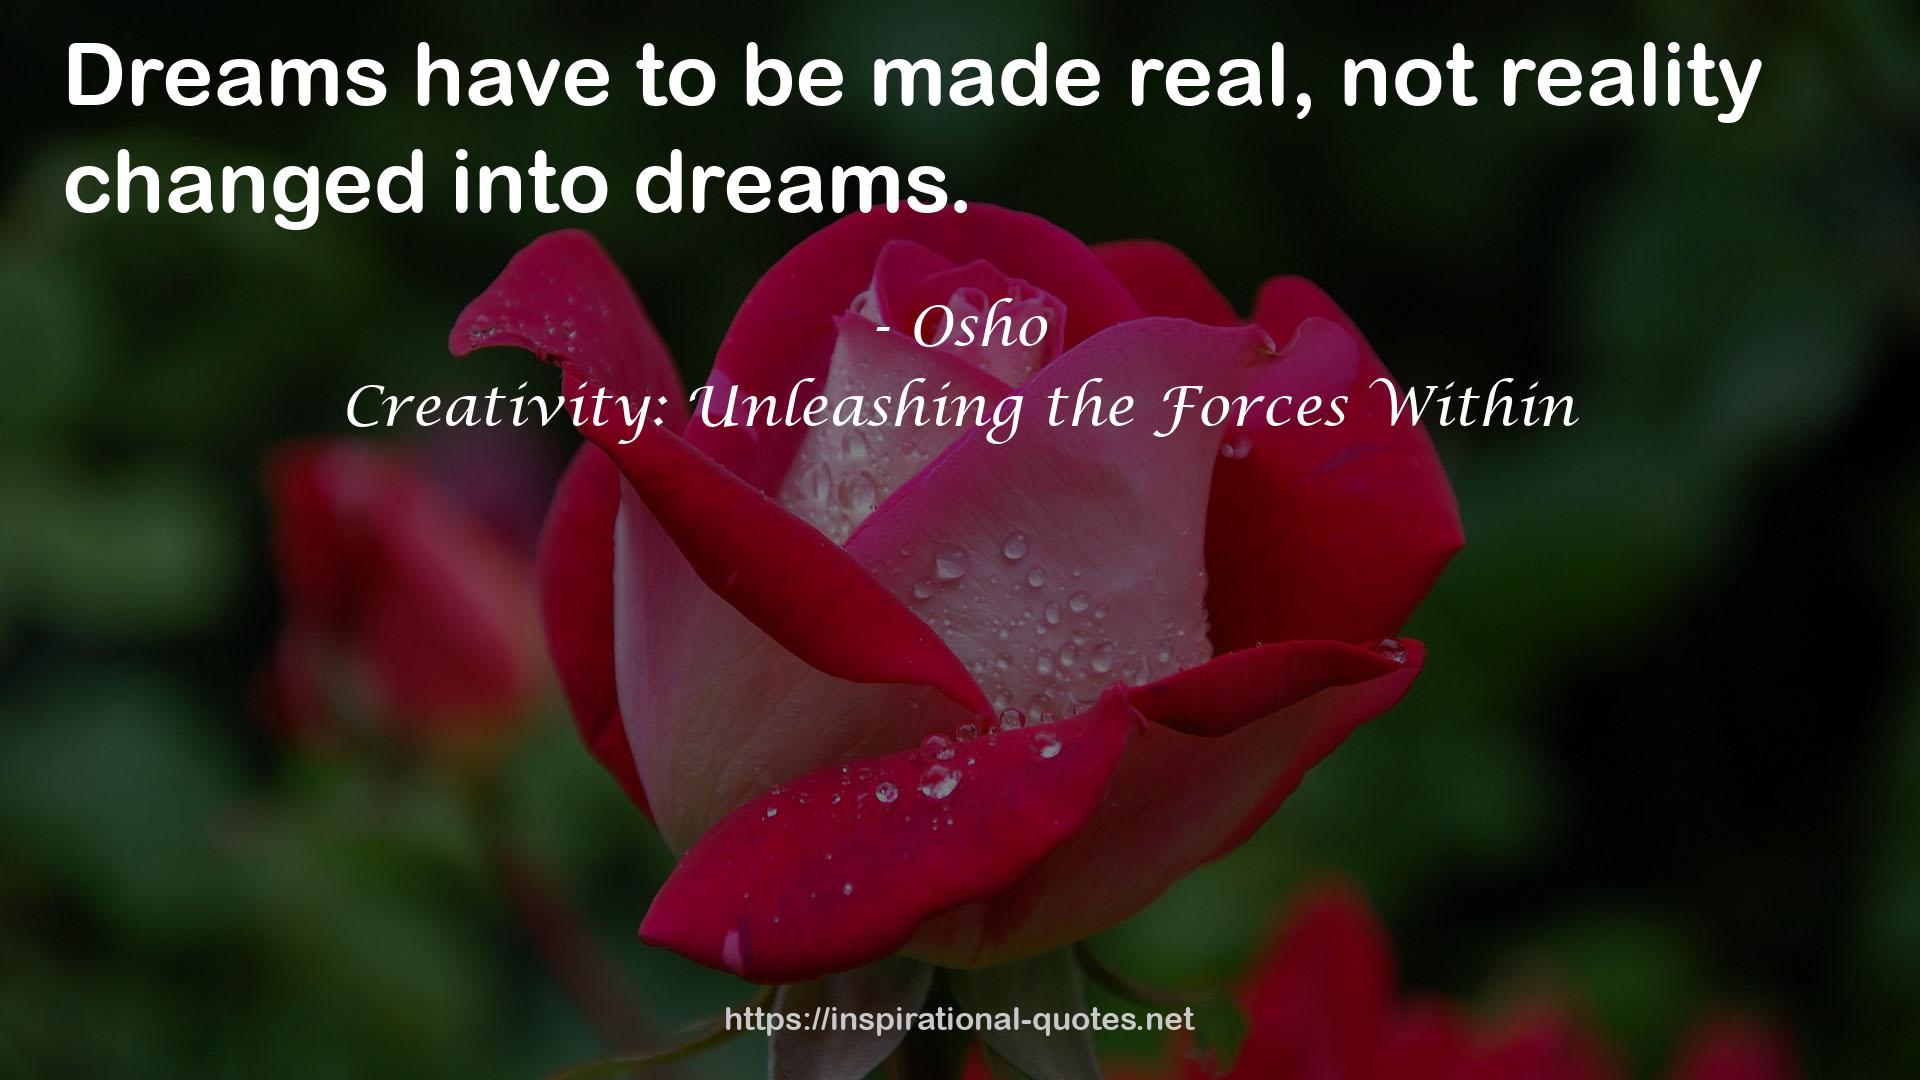 Creativity: Unleashing the Forces Within QUOTES